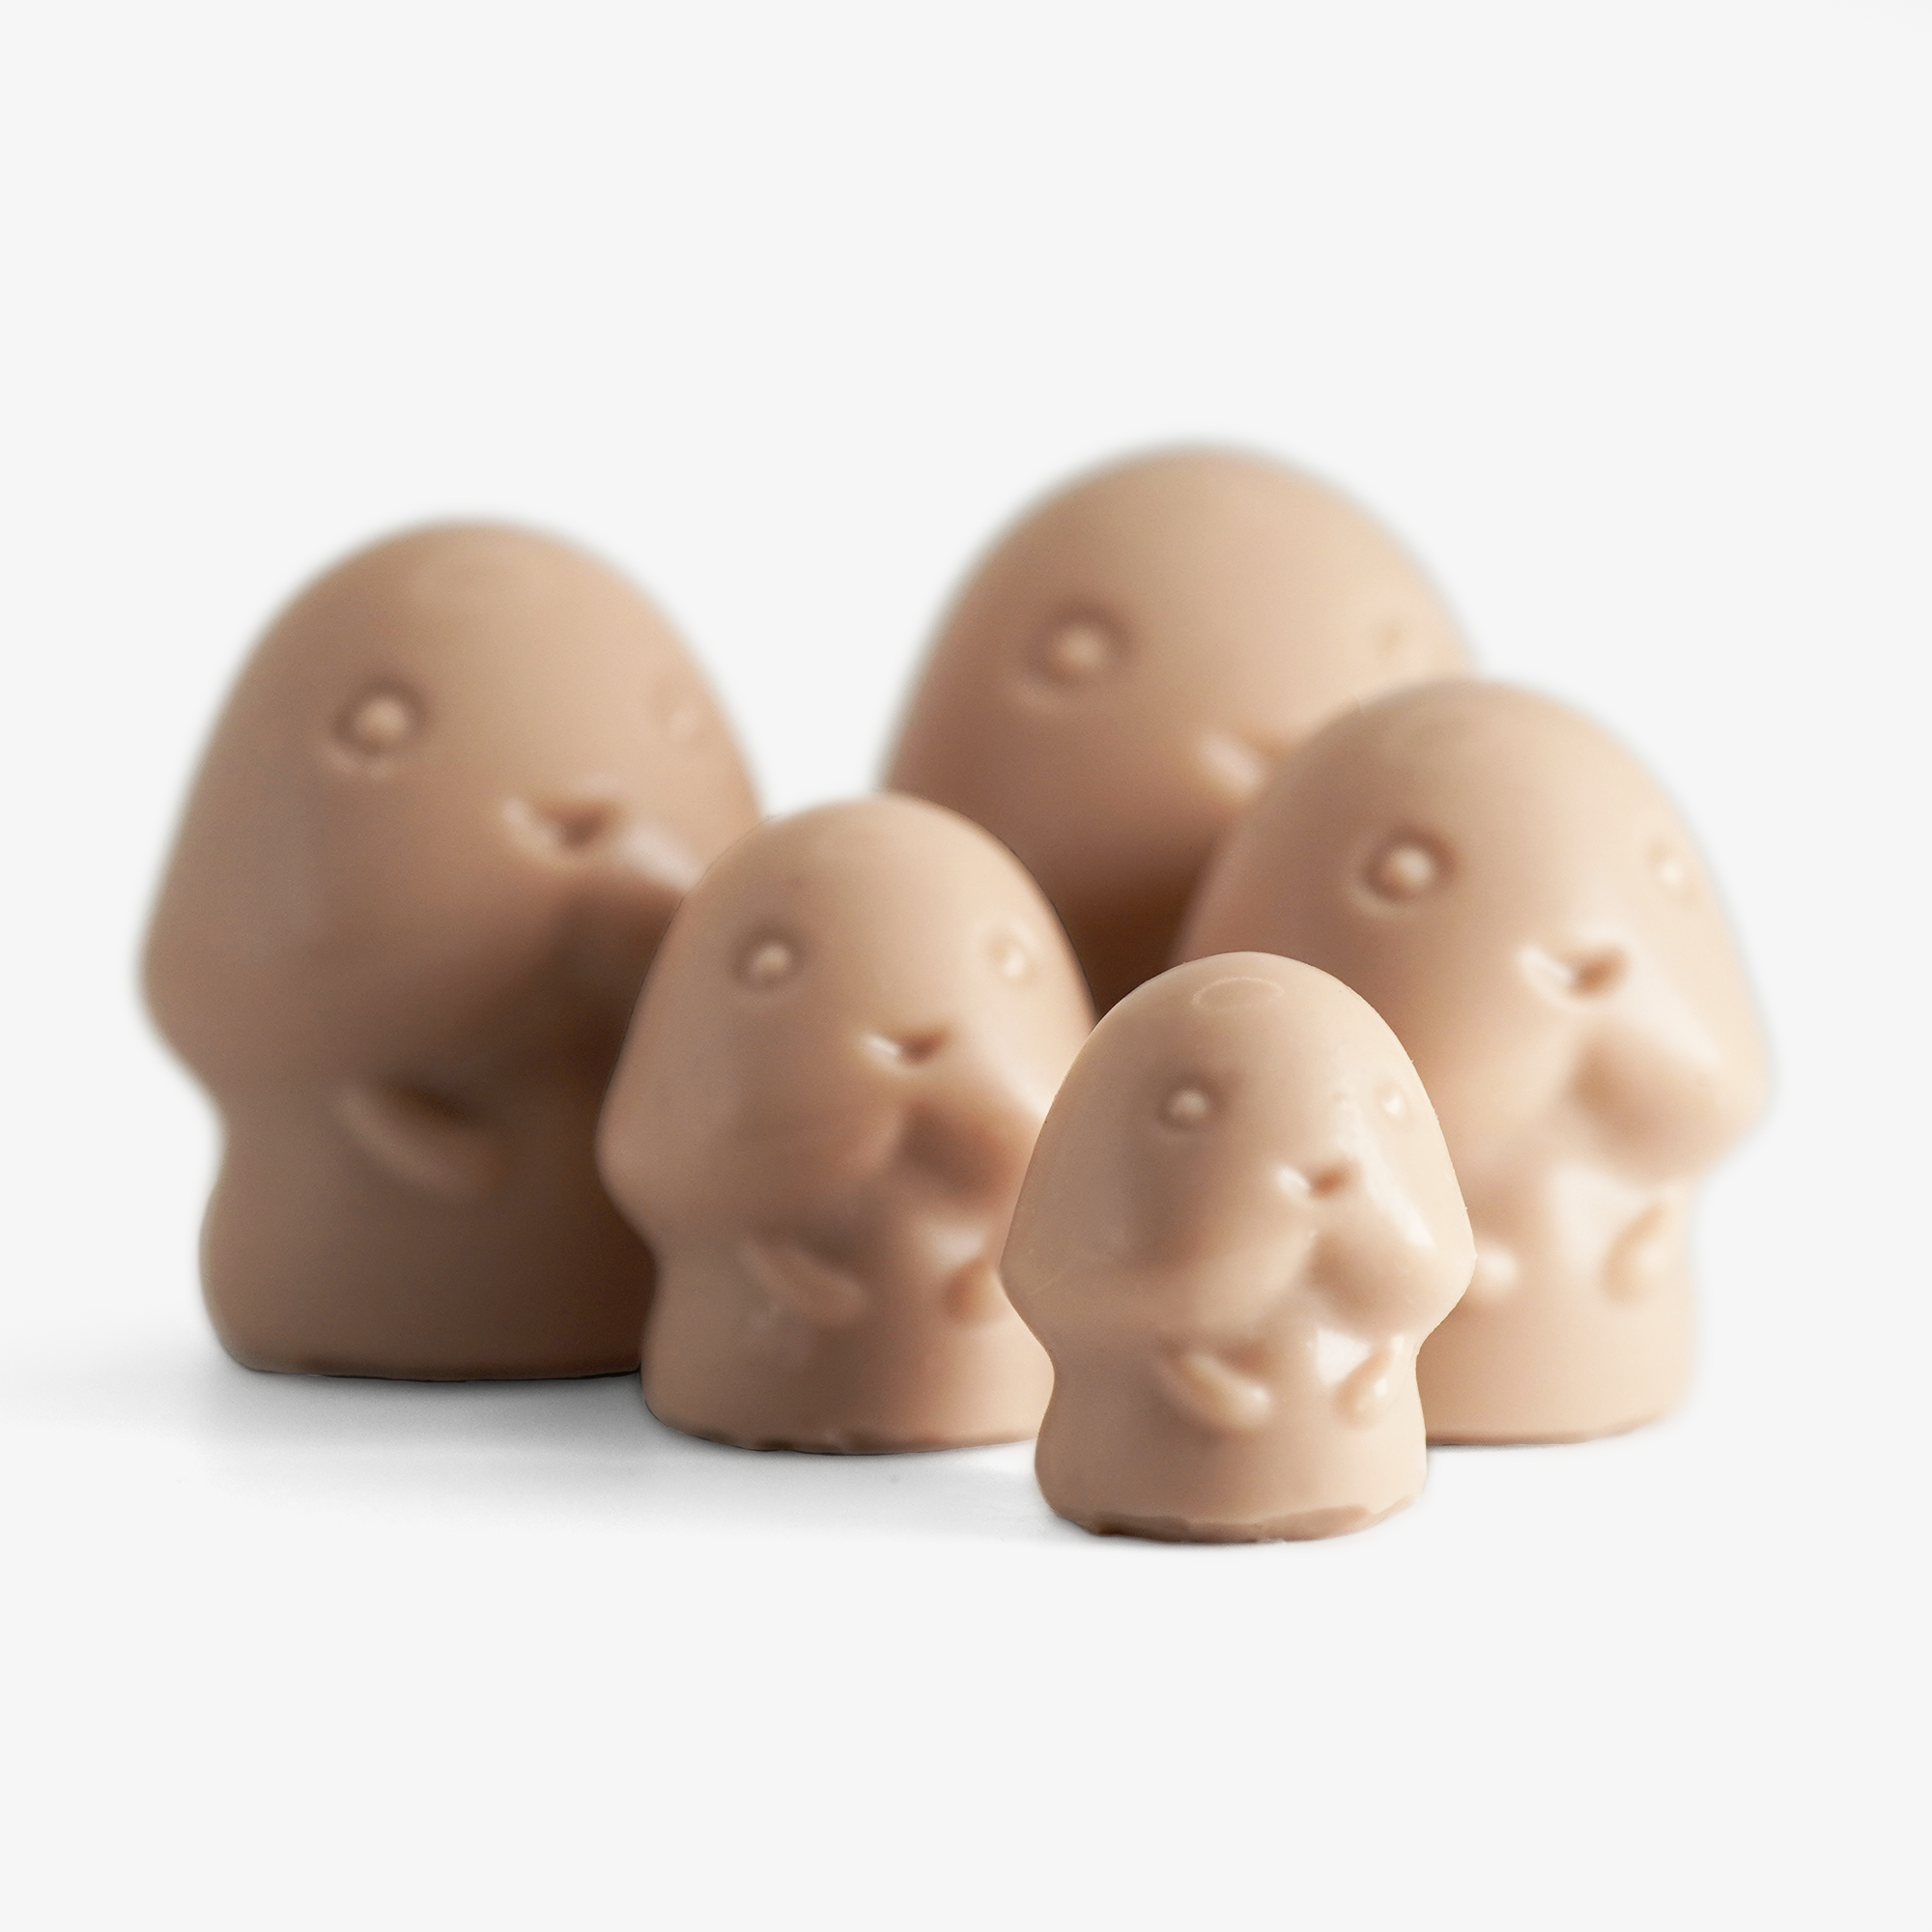 The Micro Squishies: Family of Dicks